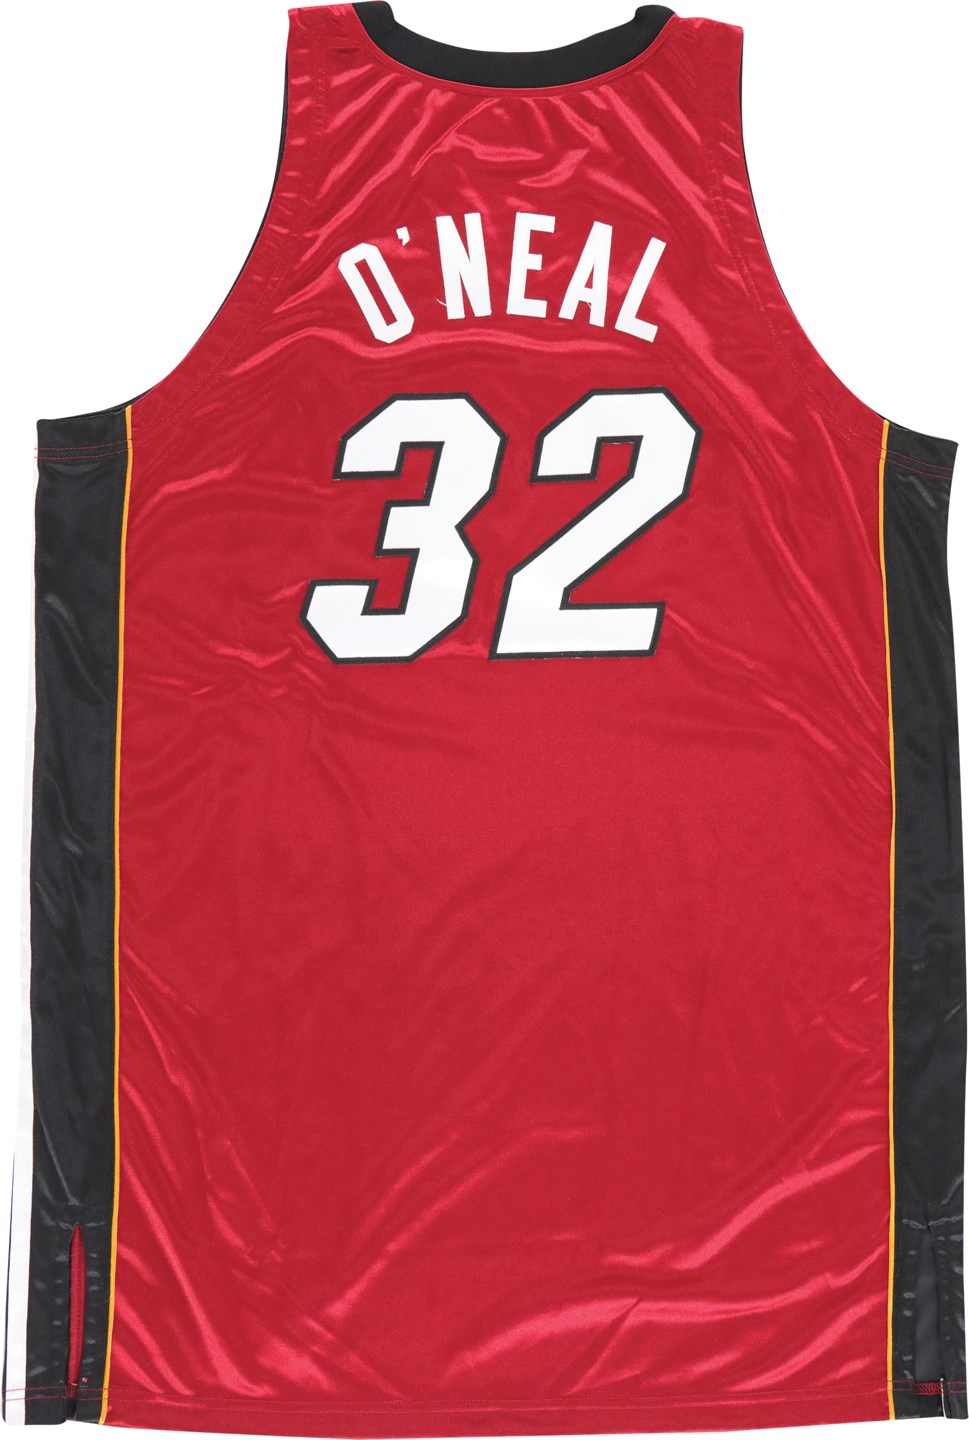 - 2004-05 Shaquille O'Neal Miami Heat Game Worn Jersey